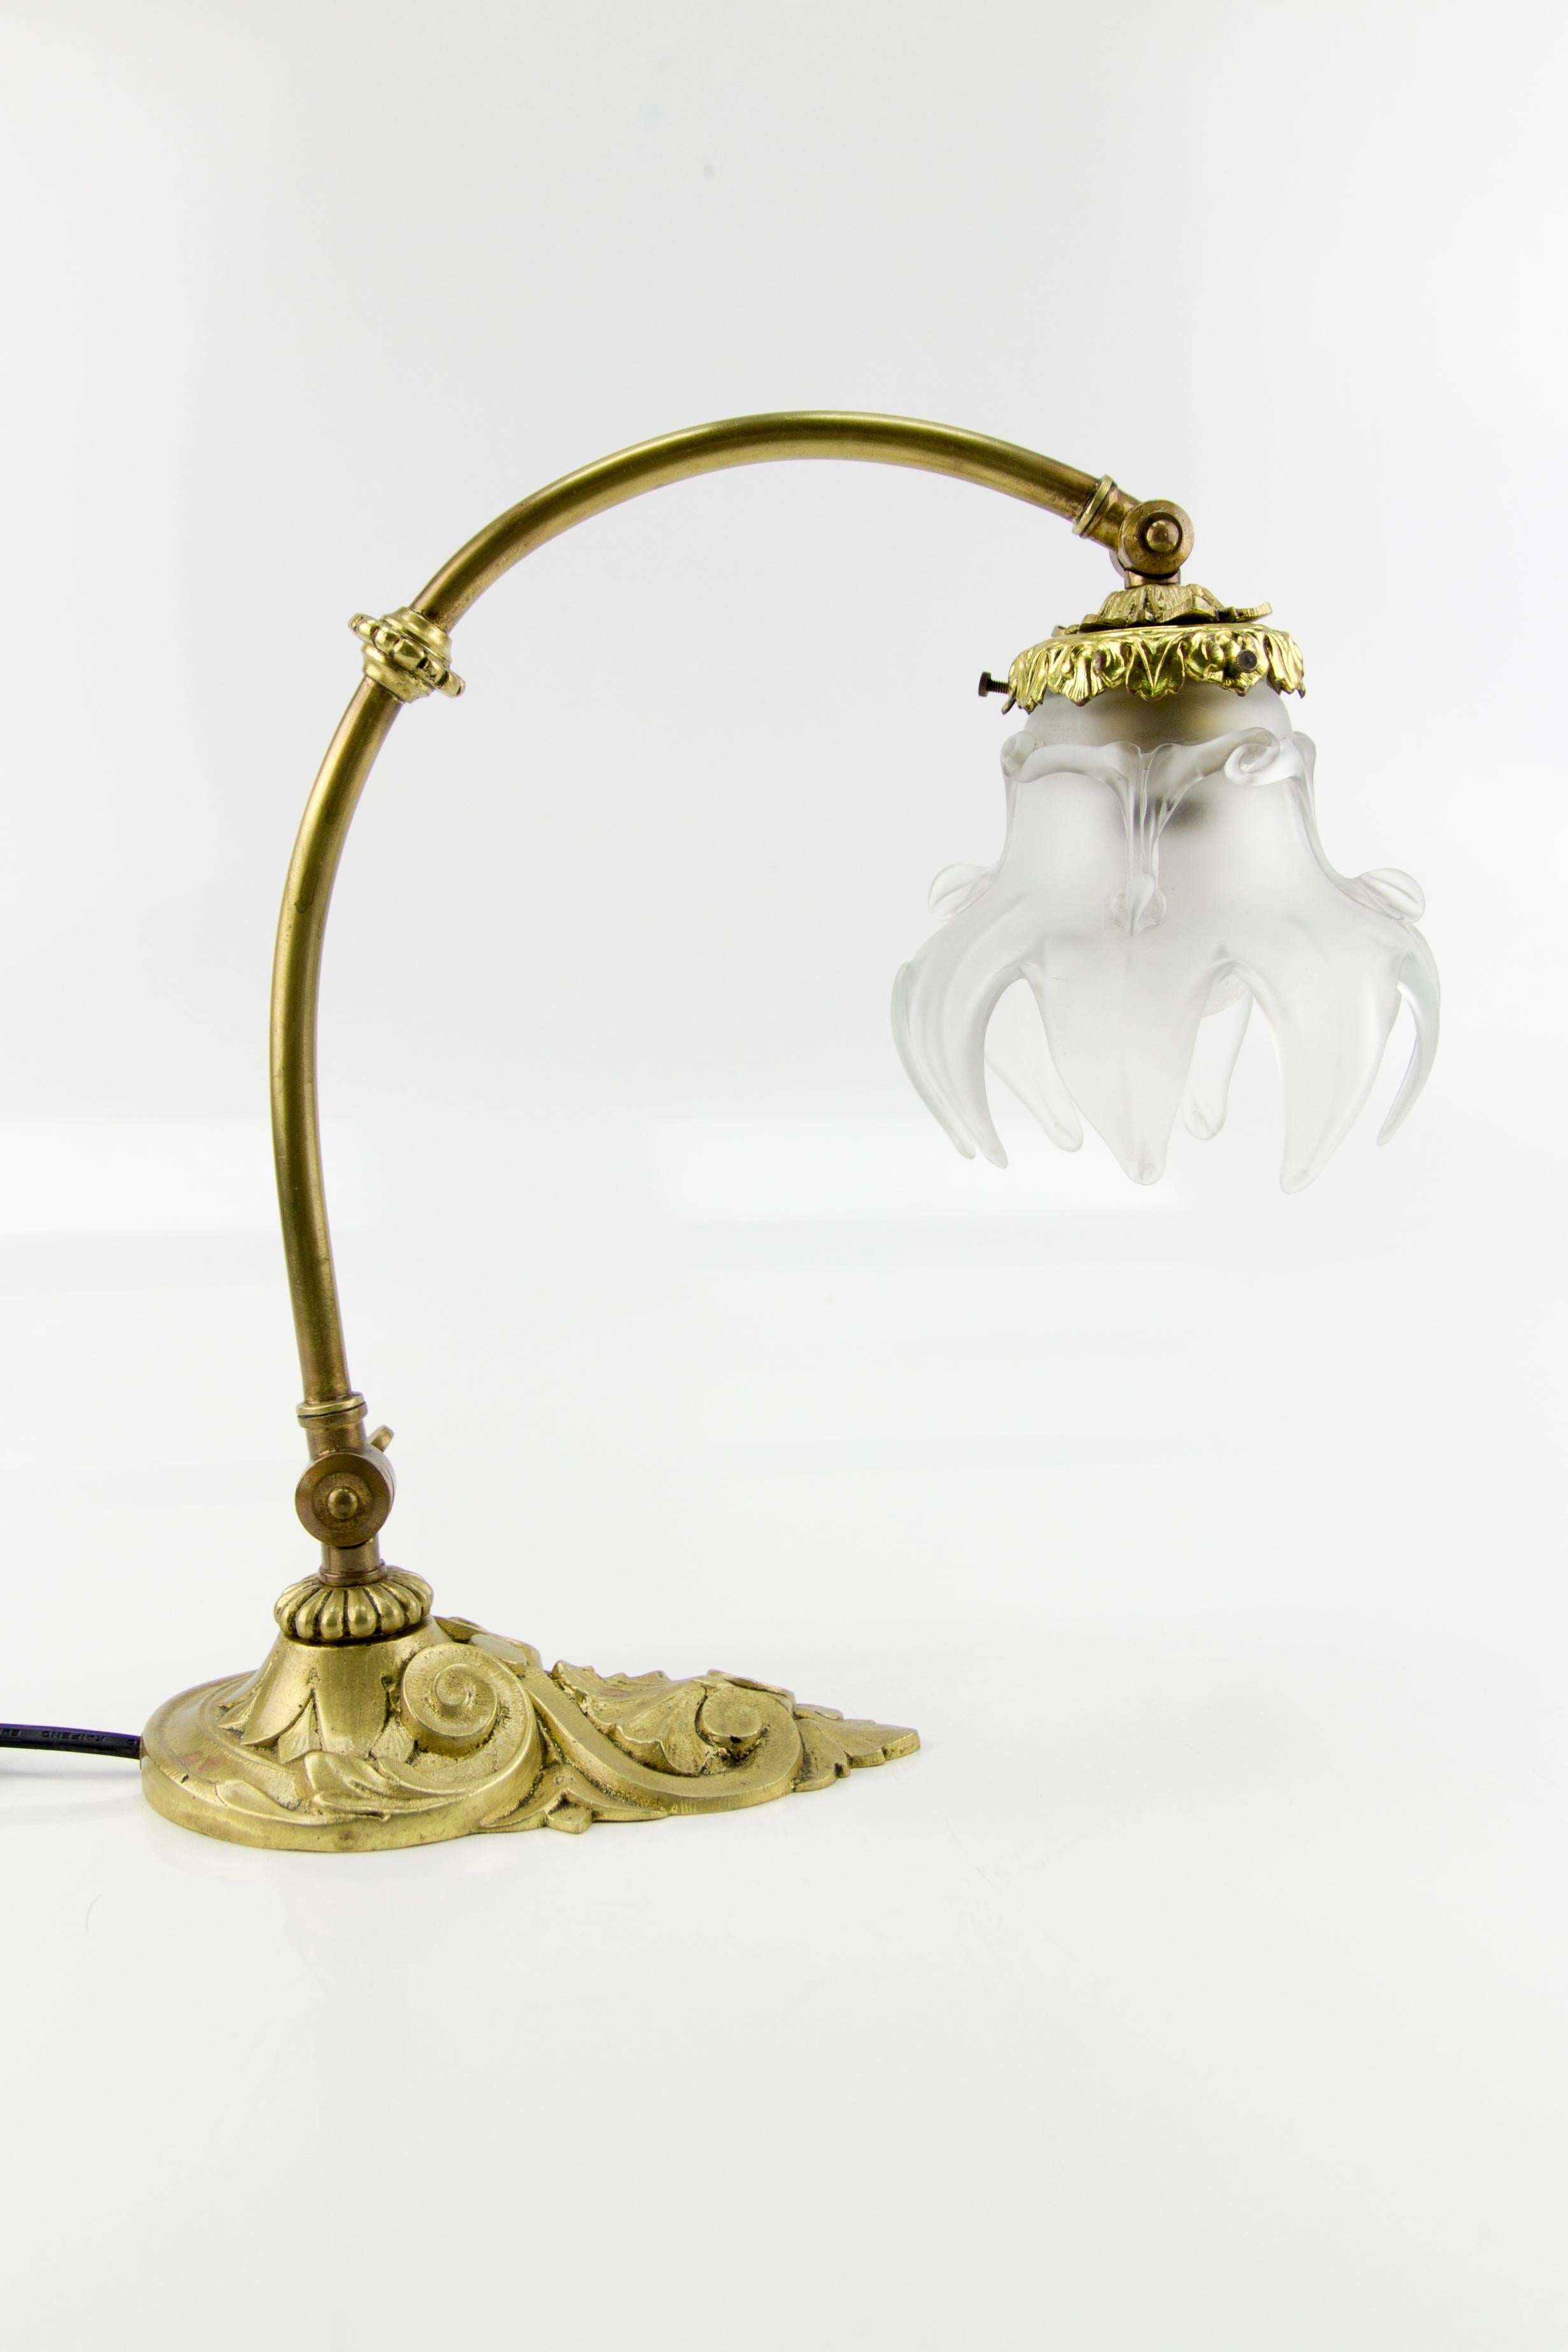 This French Art Nouveau bronze table lamp from the 1930s has a beautifully shaped frosted glass shade and ornate bronze lamp base. The lamp is adjustable in height. Can also be used as a wall lamp. One socket for an E27 (E26) size light bulb. To the